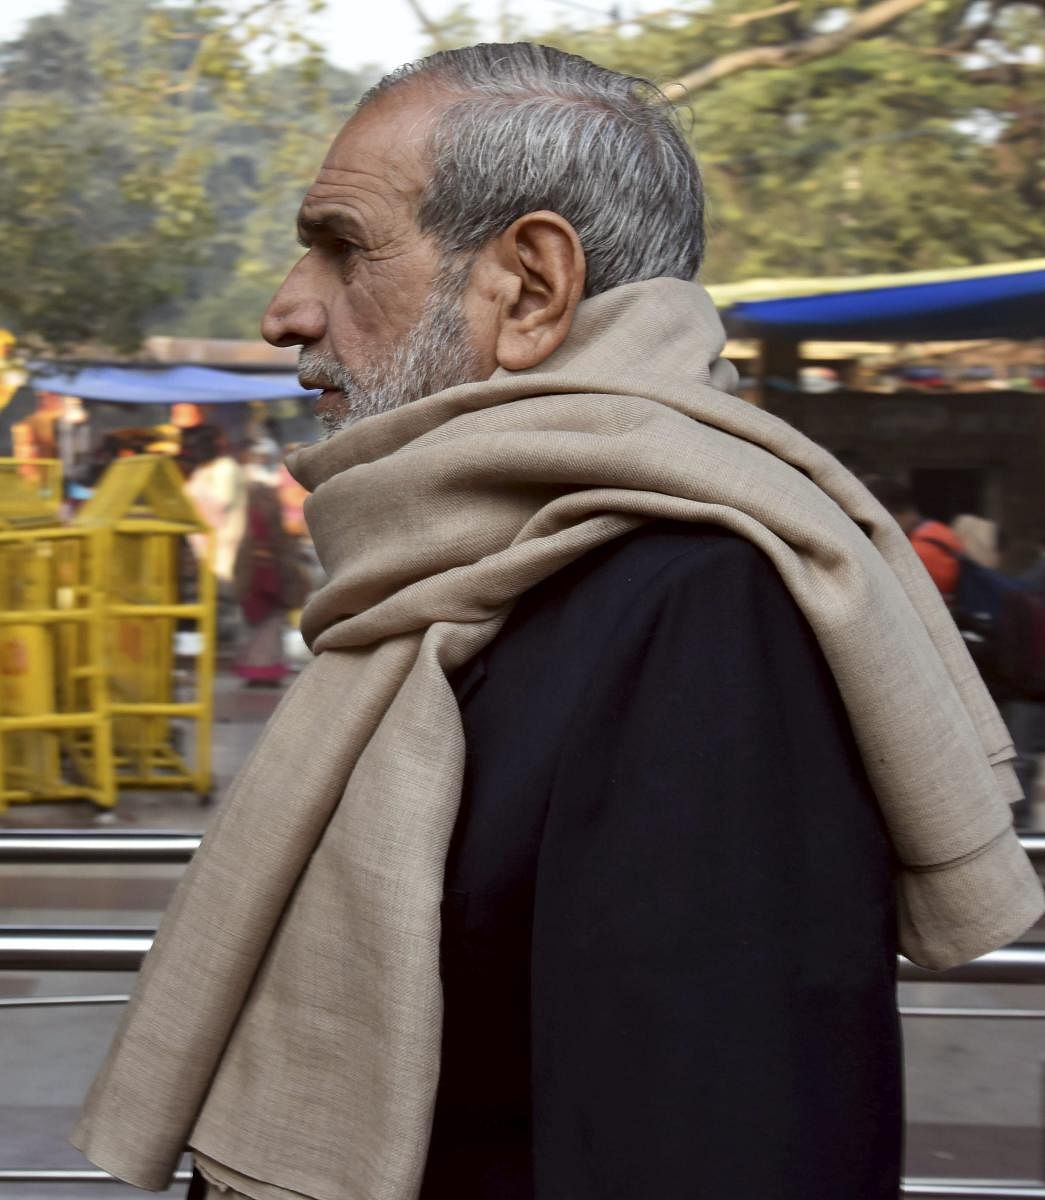 Congress leader Sajjan Kumar leaves after offering prayers at Hanuman temple in Connaught Place, in New Delhi. PTI